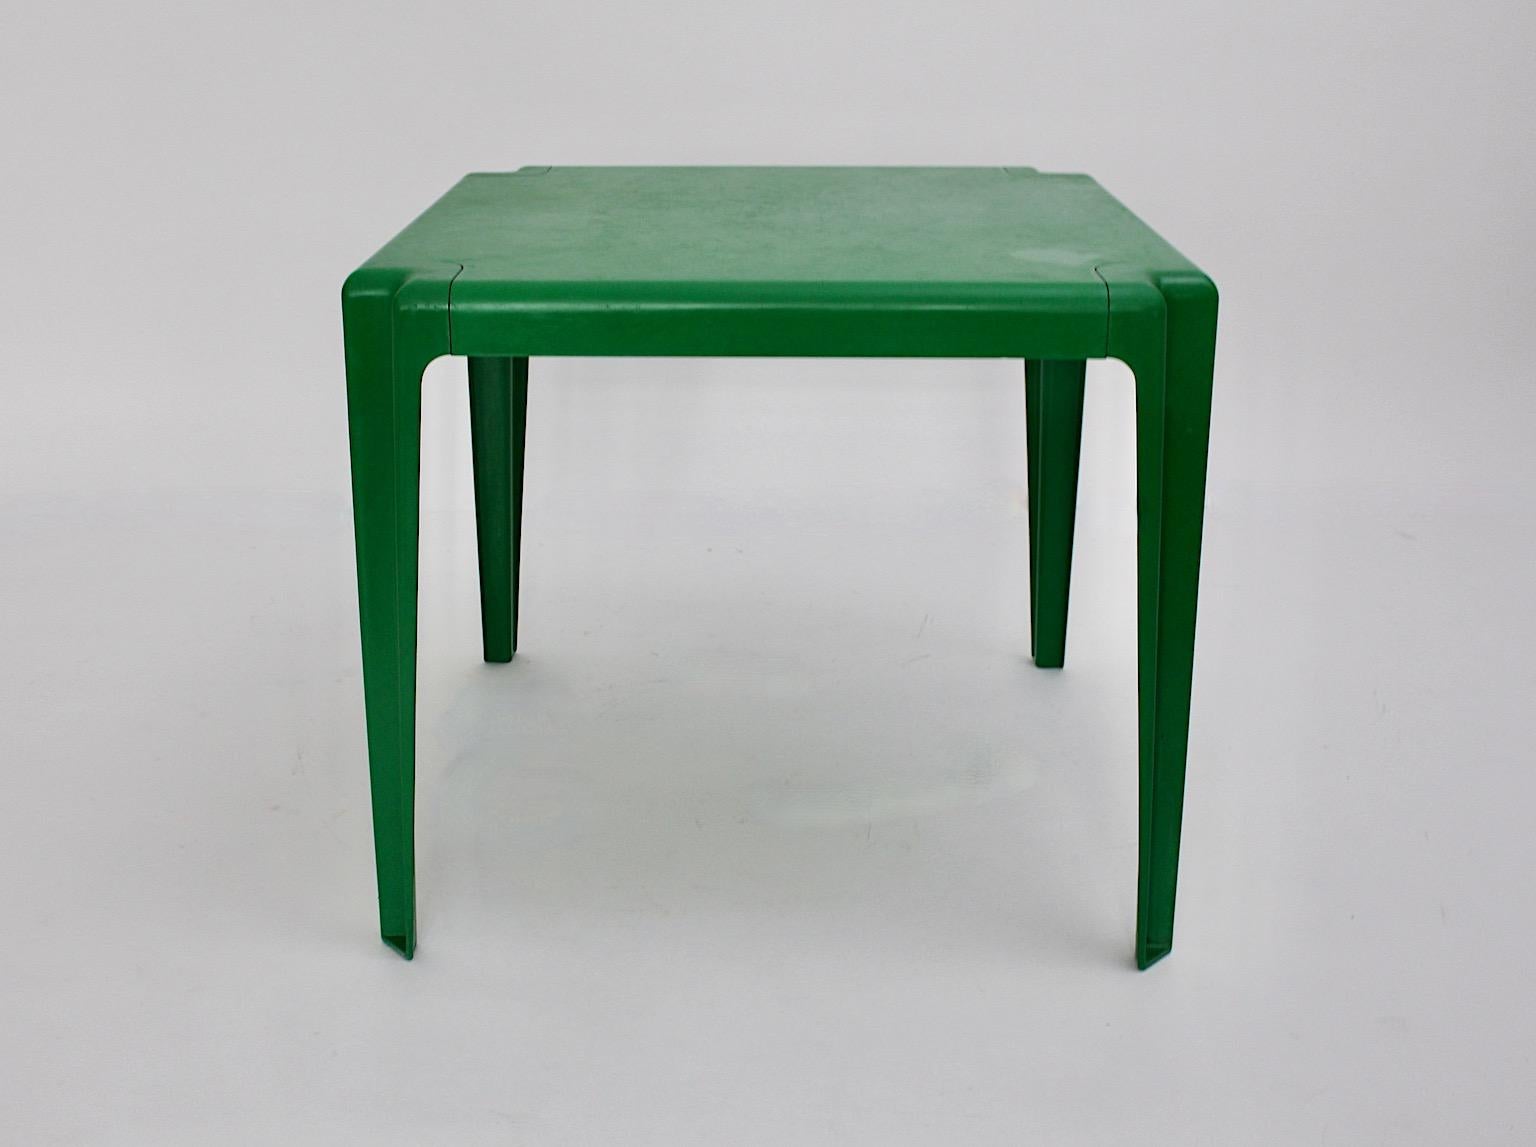 Space Age Vintage Green Plastic Dining Table Patio Table Helmut Bätzner, 1960s For Sale 1